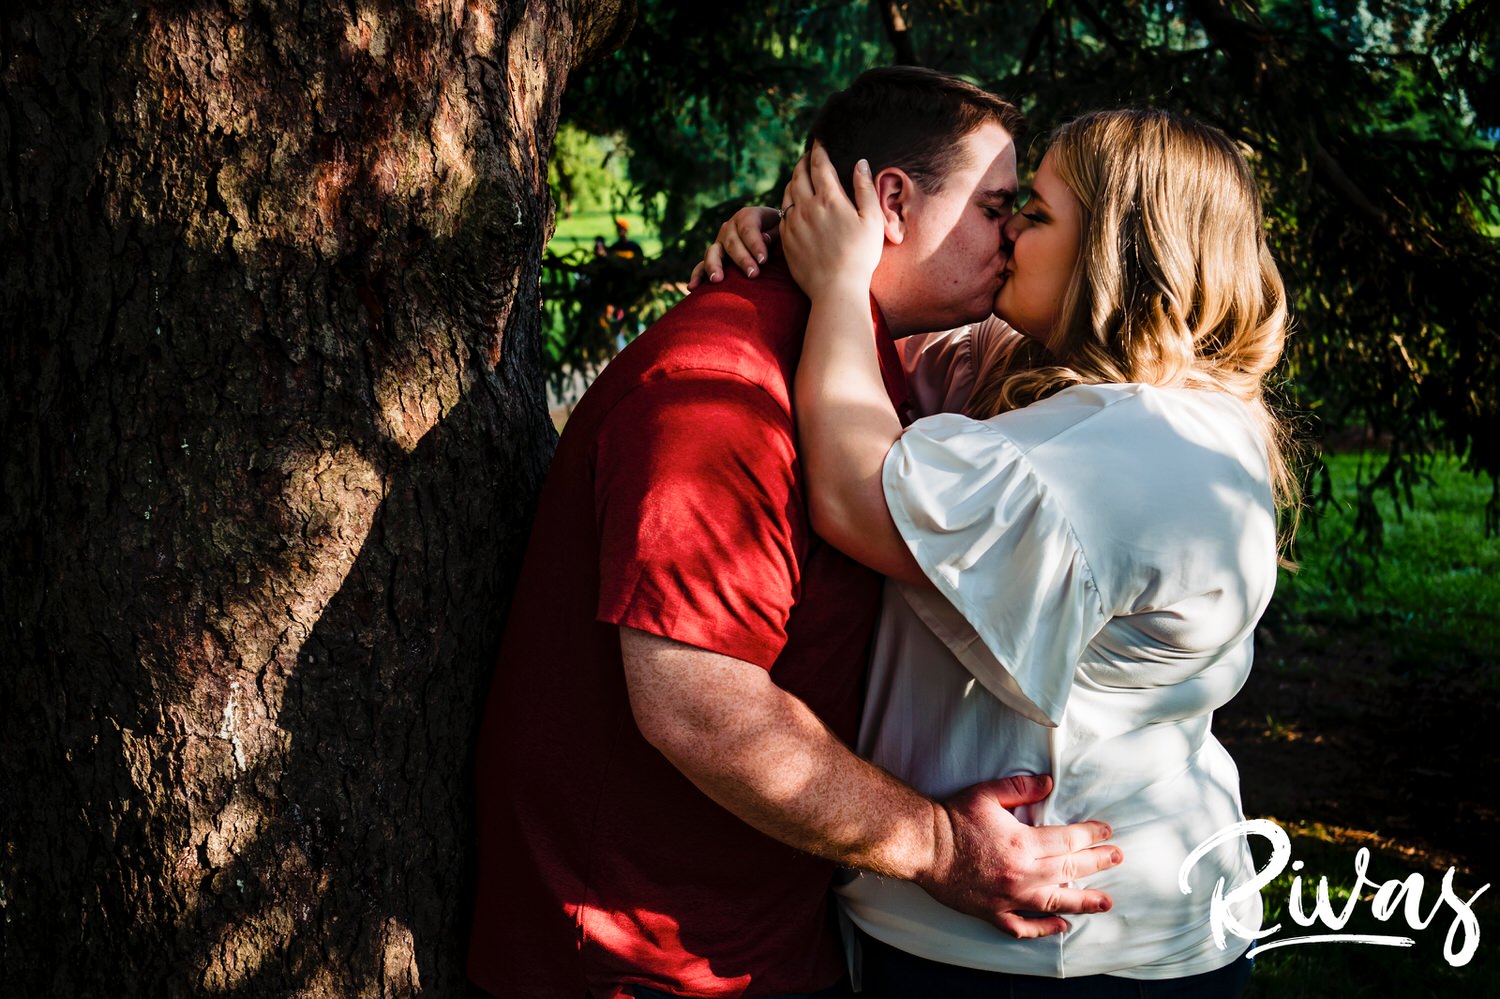 A close-up, candid picture of an engaged couple standing underneath a tree sharing an embrace and kiss during their summer engagement photography session at Kansas City's Loose Park